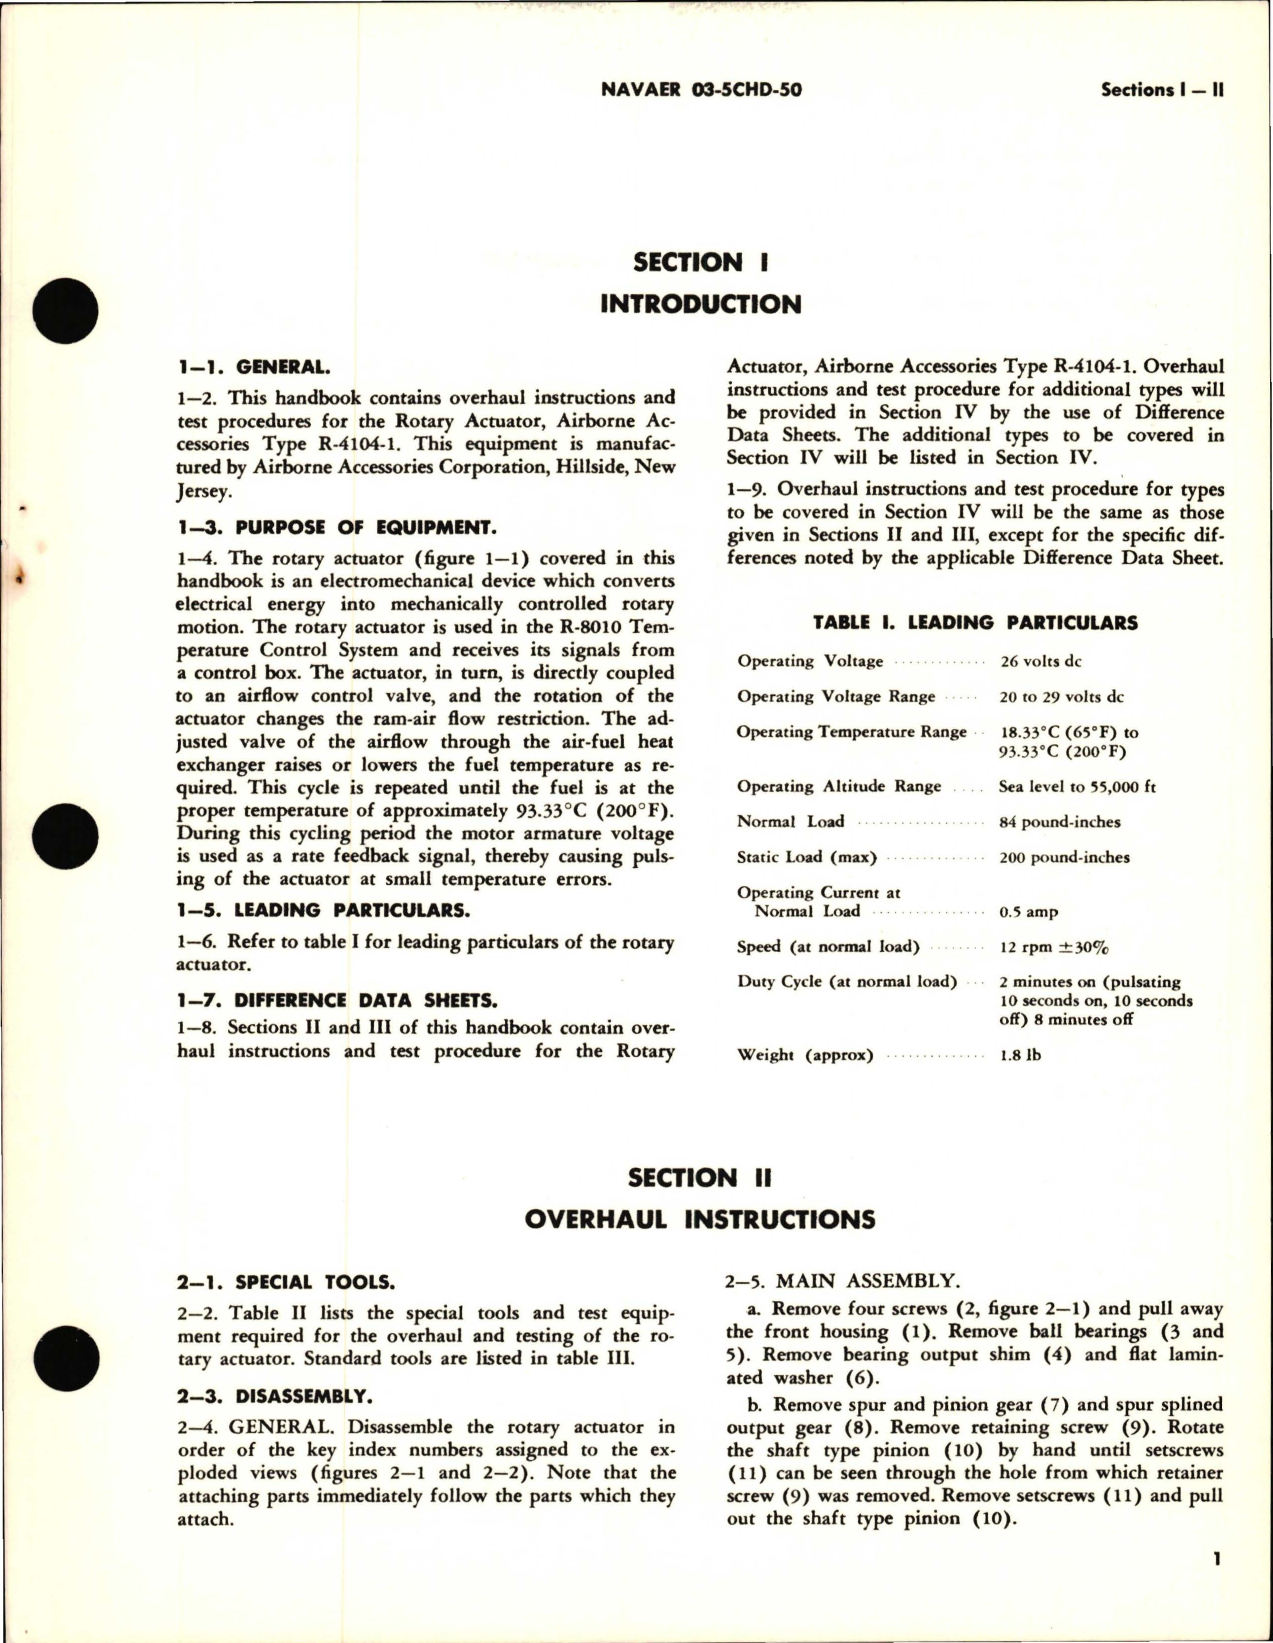 Sample page 5 from AirCorps Library document: Overhaul Instructions for Rotary Actuator Type No. R-4104-1